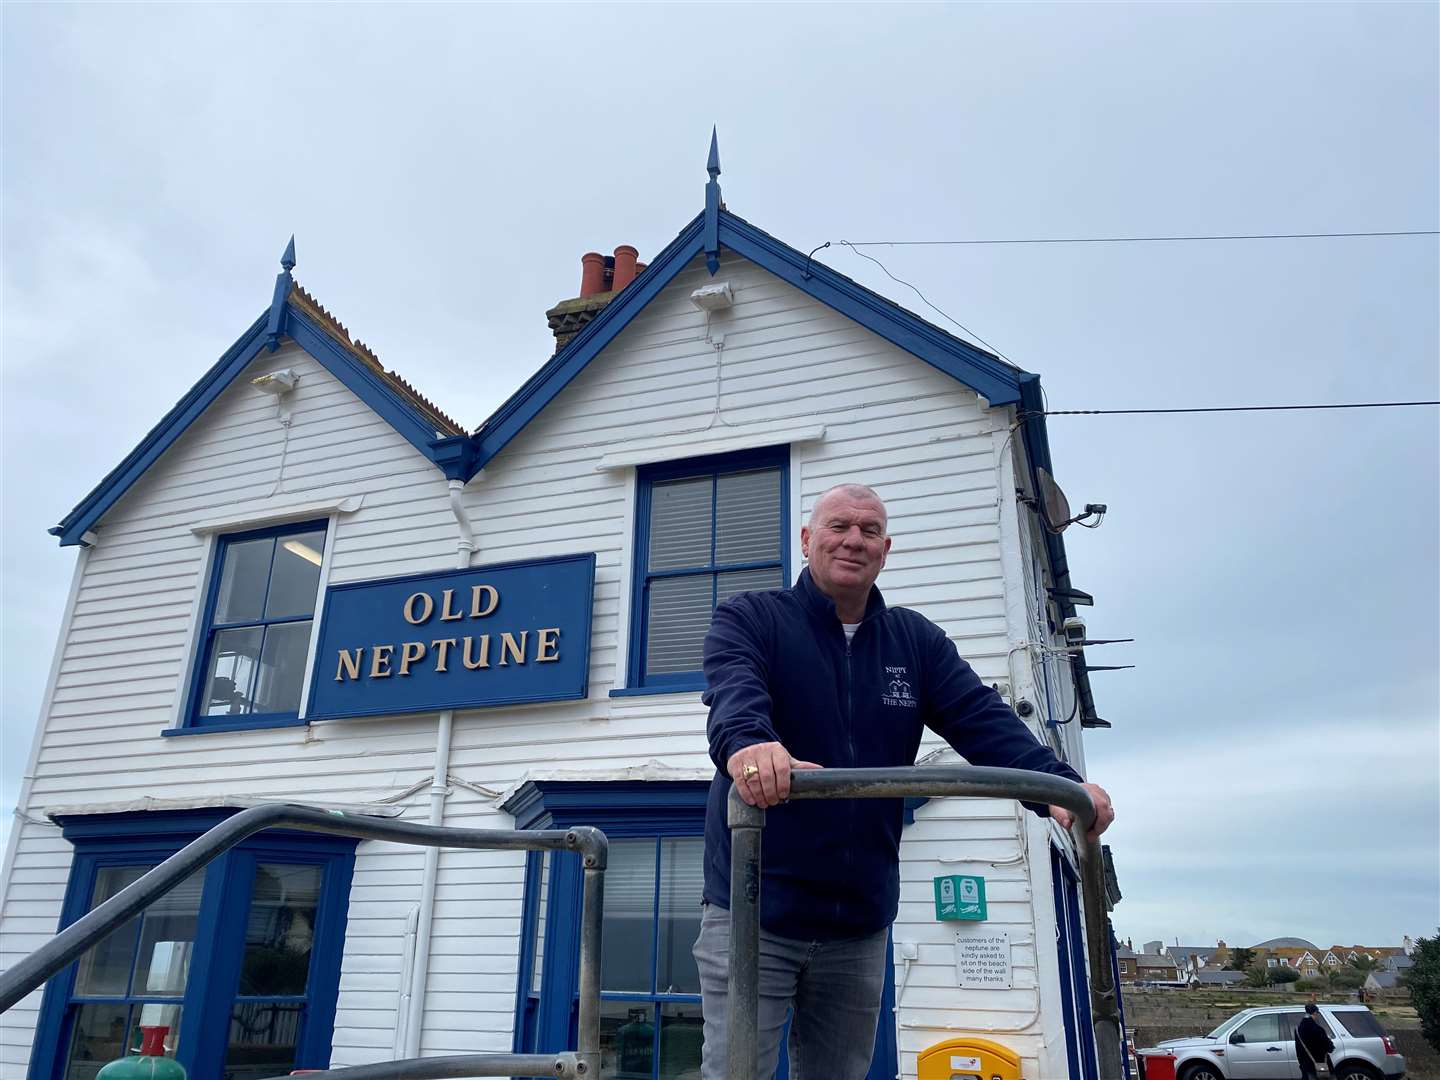 Darren Wilton at the Old Neptune on Whitstable seafront